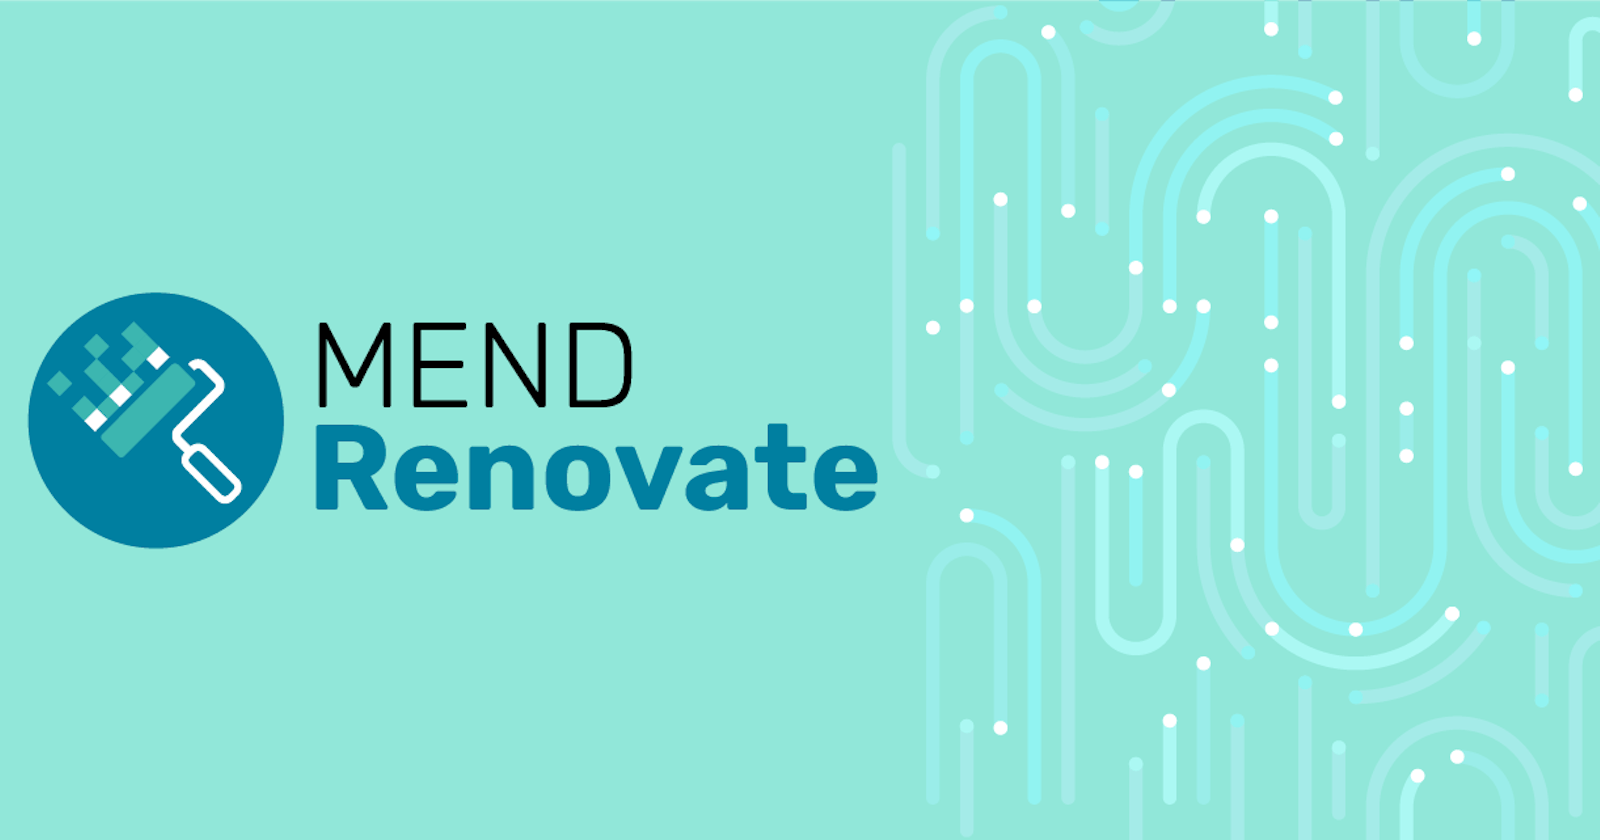 Automate your dependency updates with Renovate